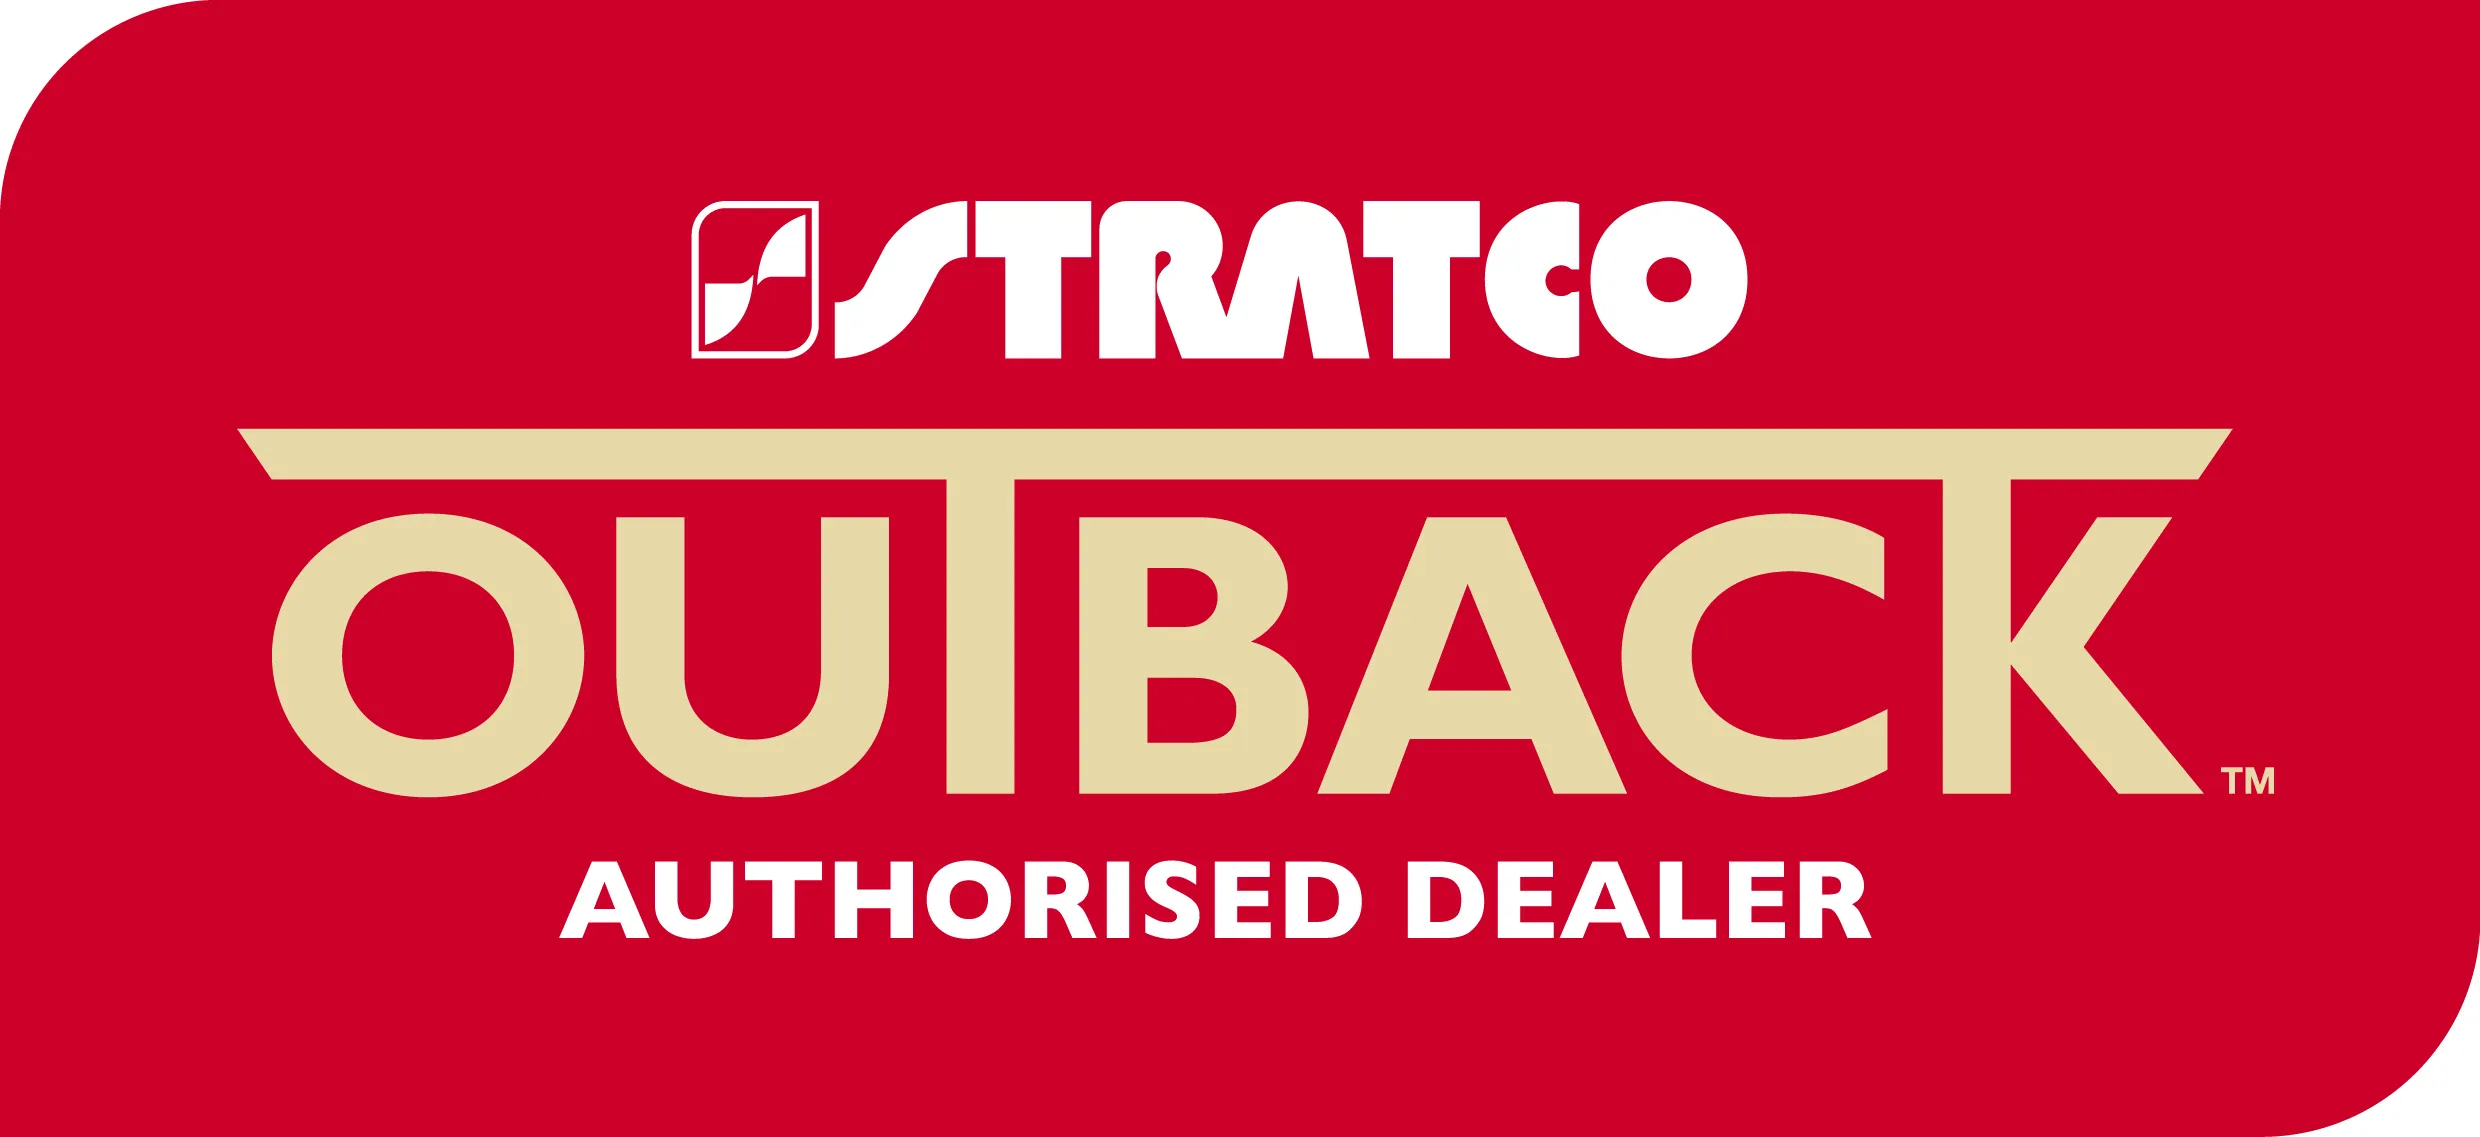 Stratco Outback Authorised Dealer